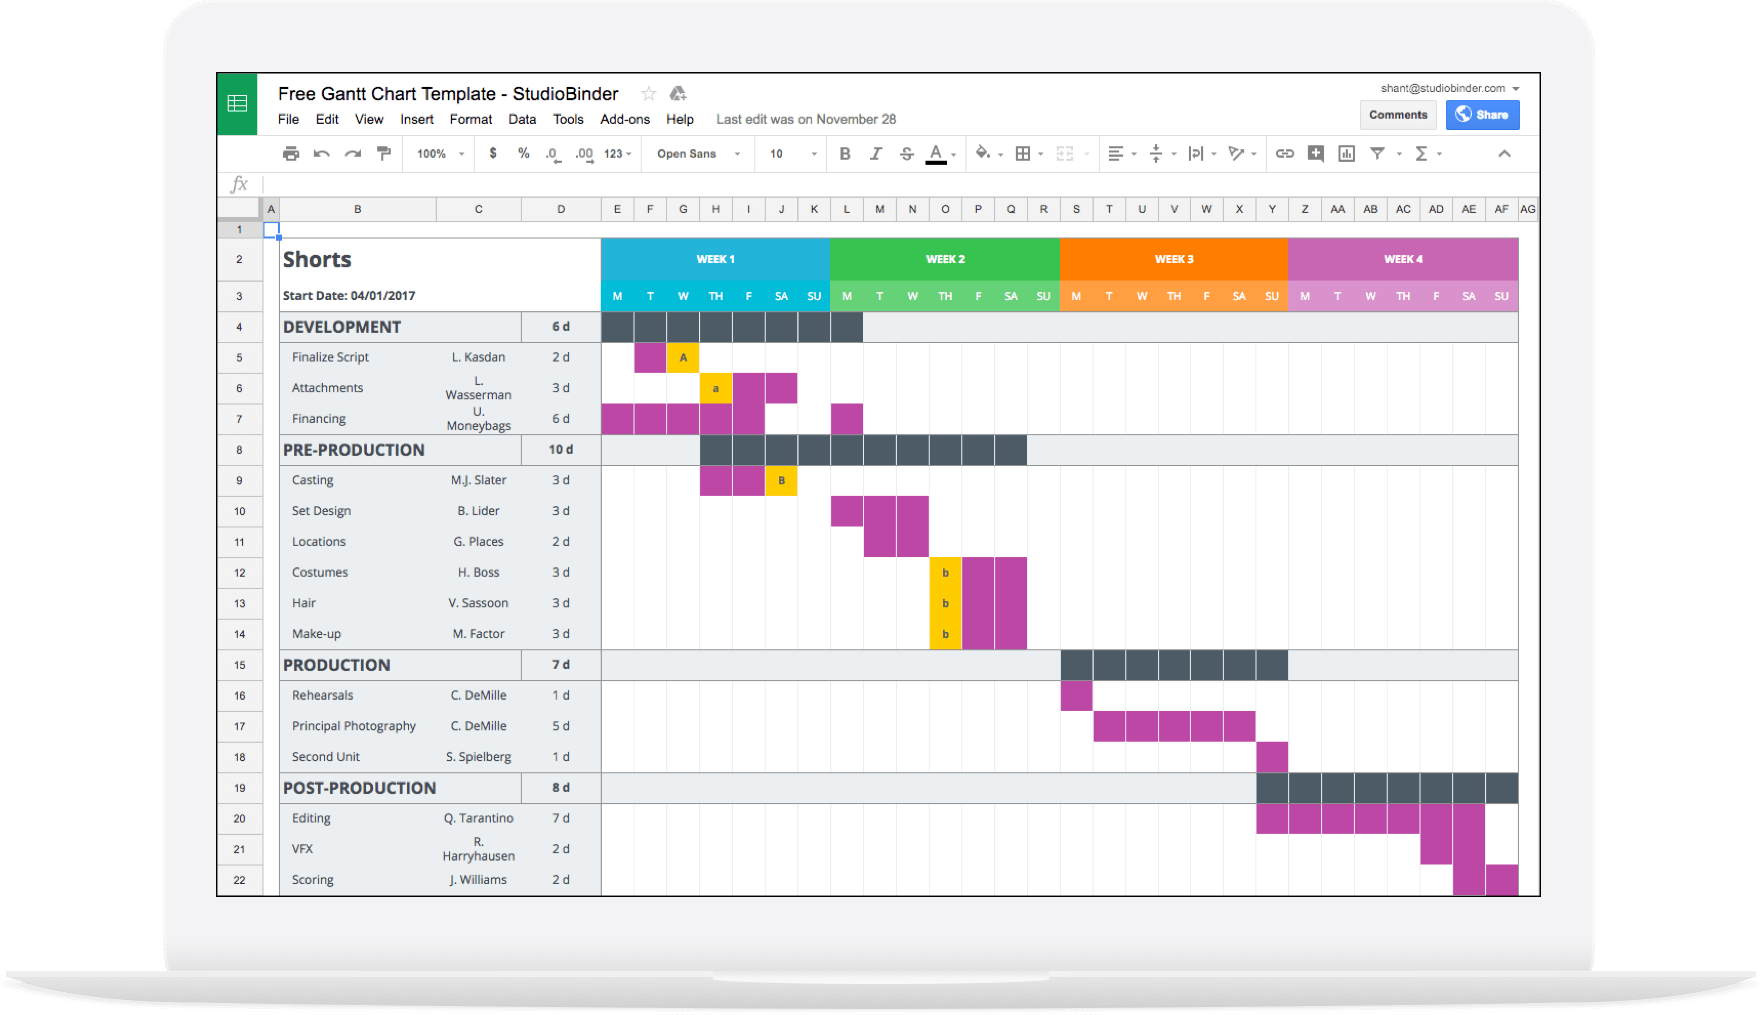 download-a-free-gantt-chart-template-for-your-production